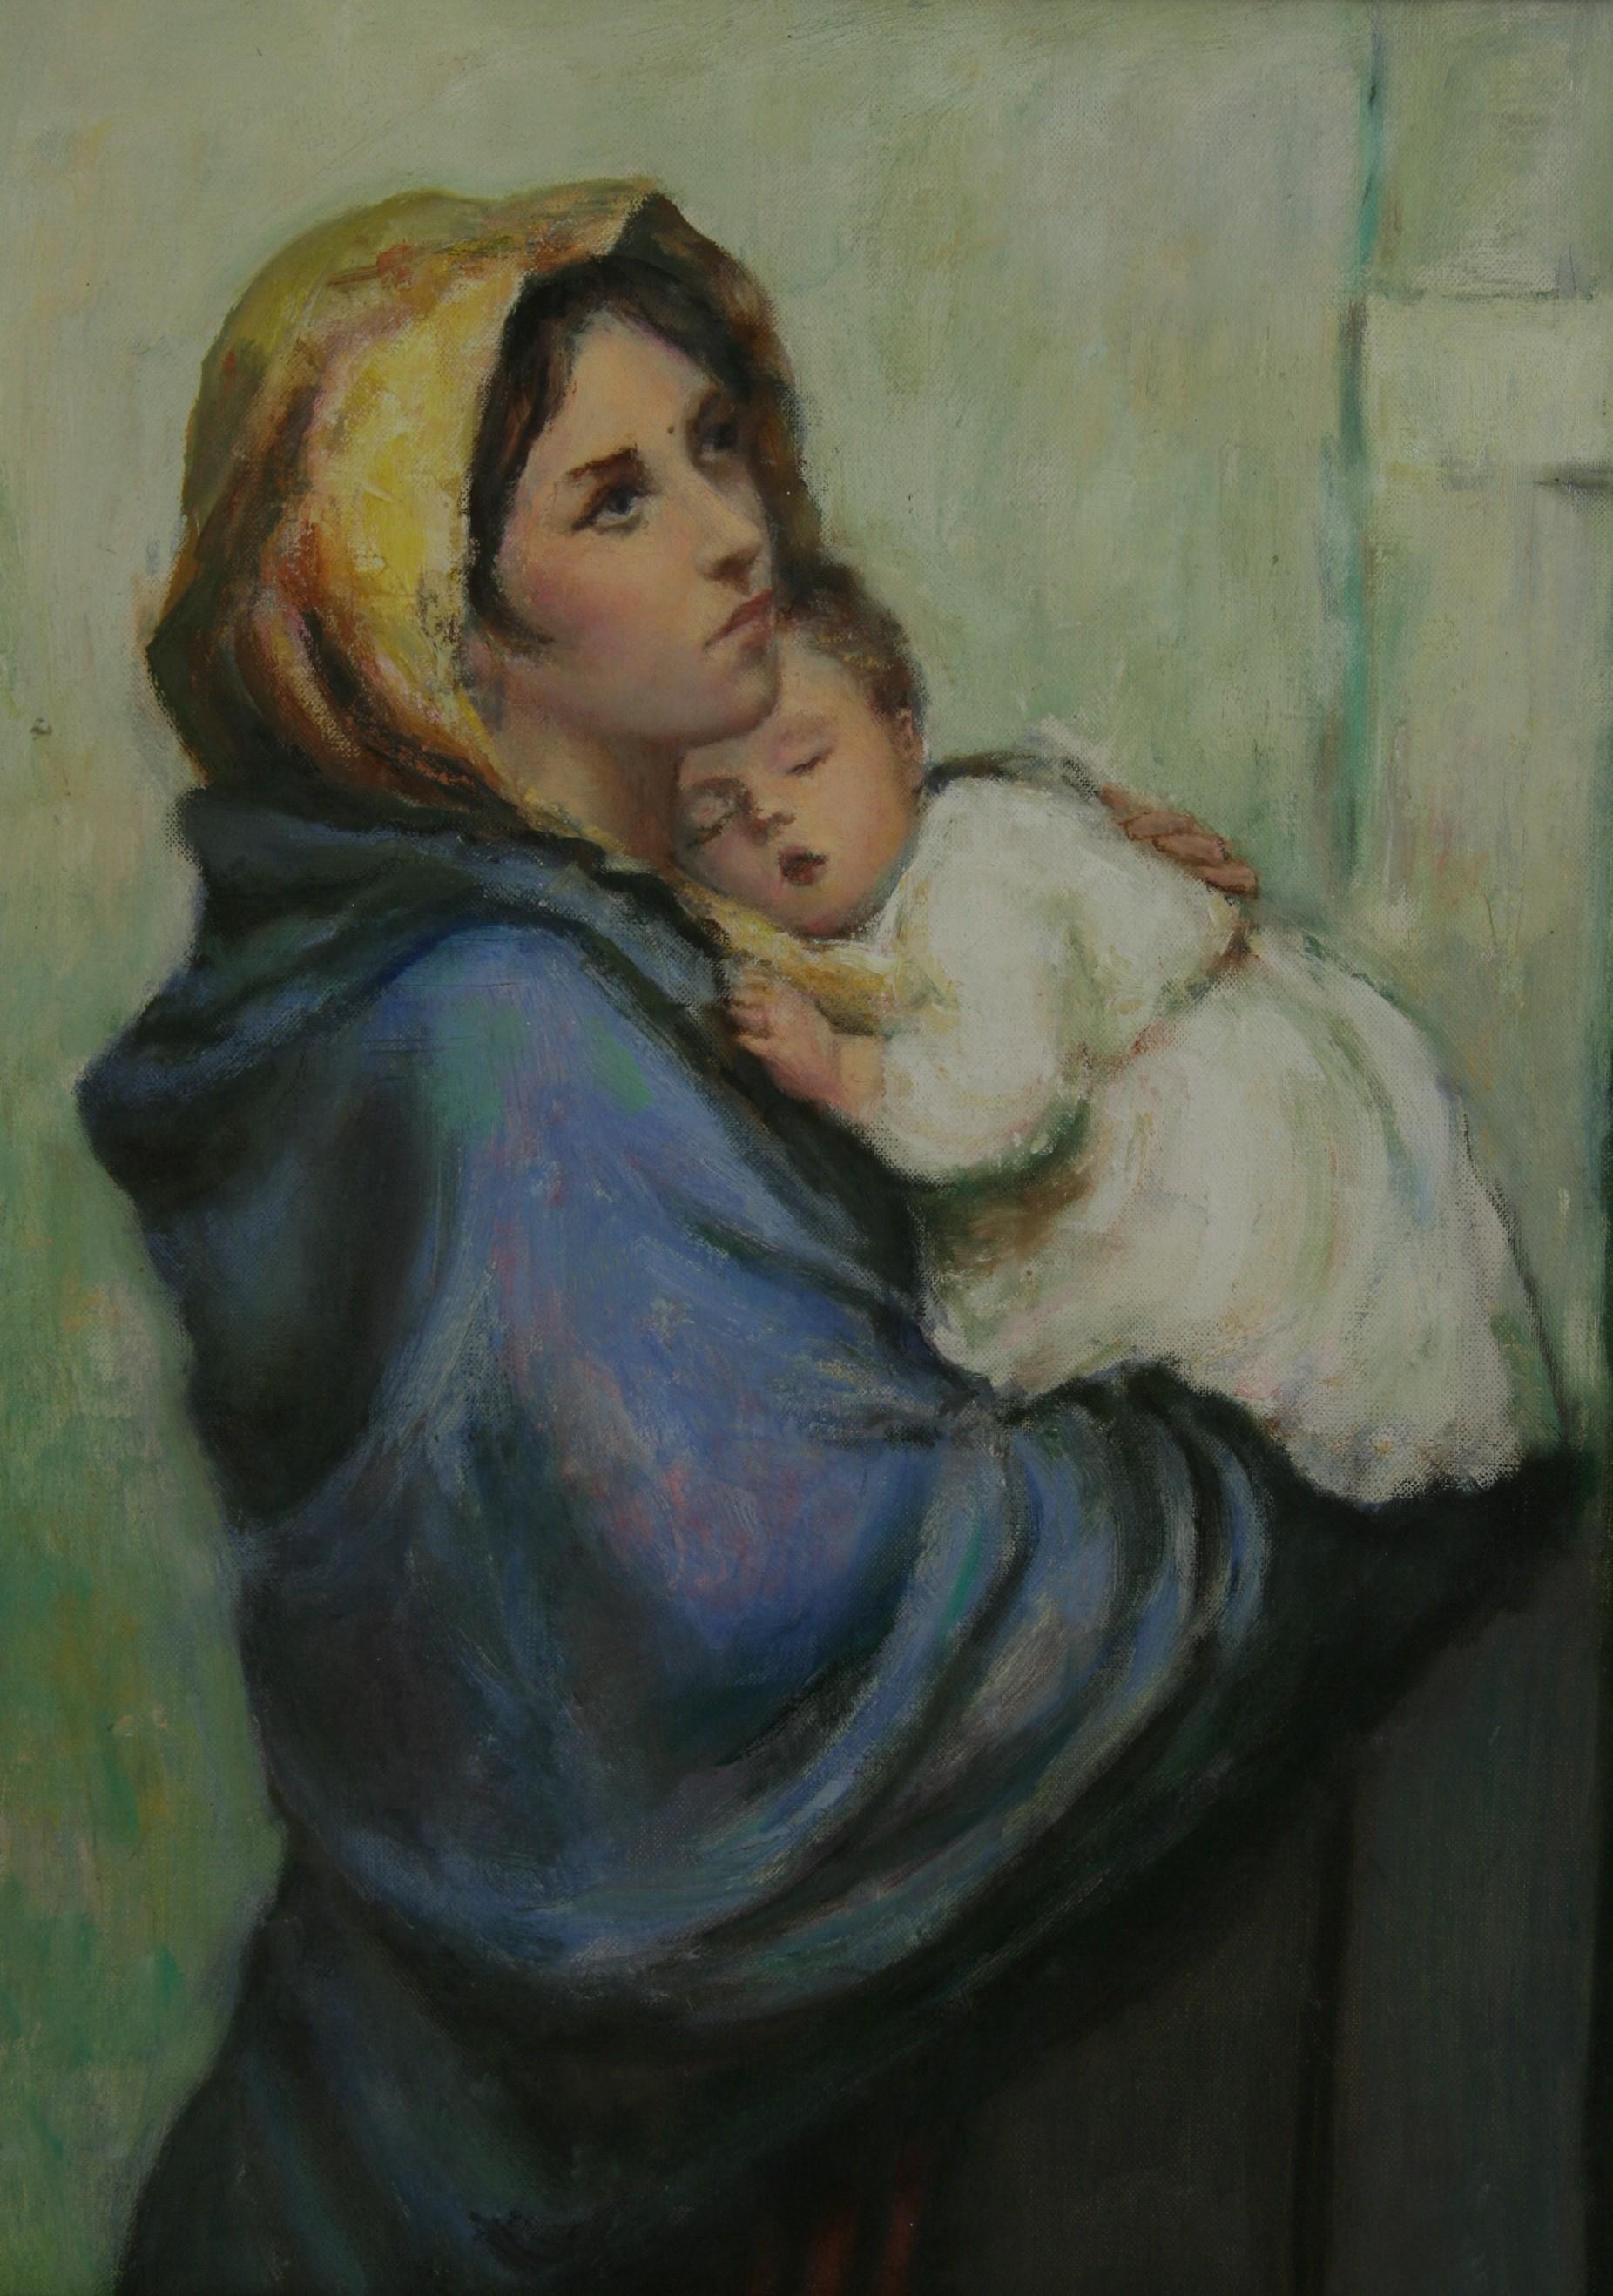 5-3757 Mother and Child oil painting
Signed Bea Wynn